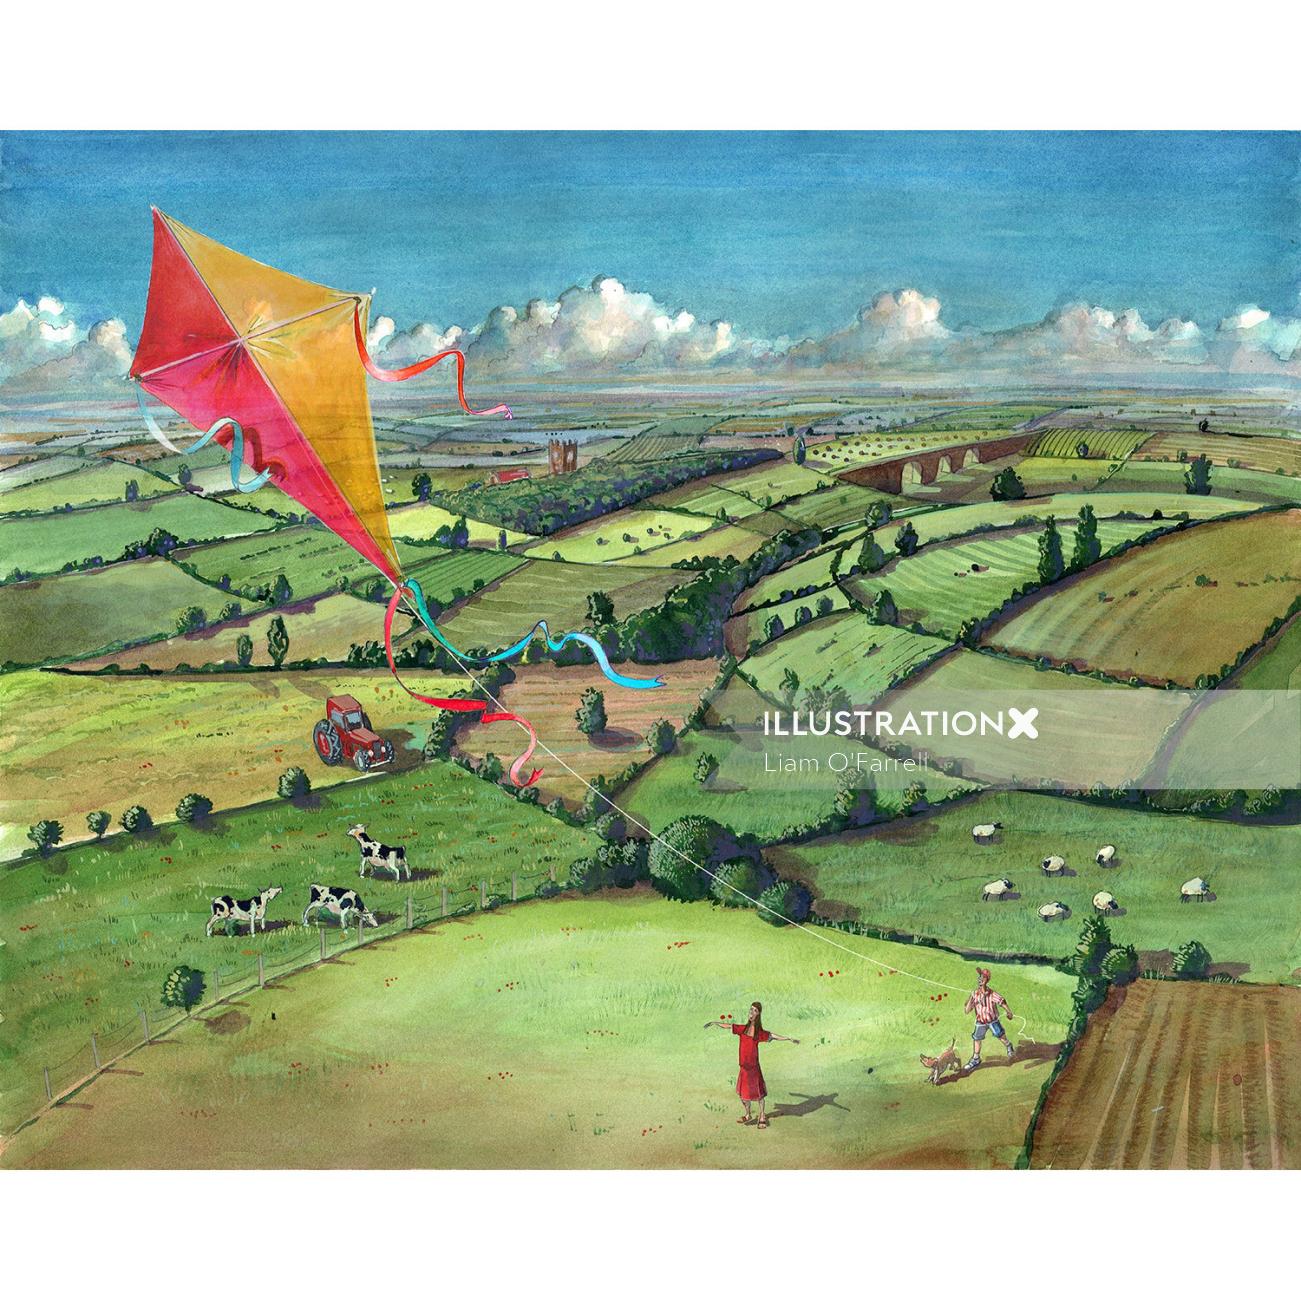 BBC CountryFile Magazine How to fly a kite
